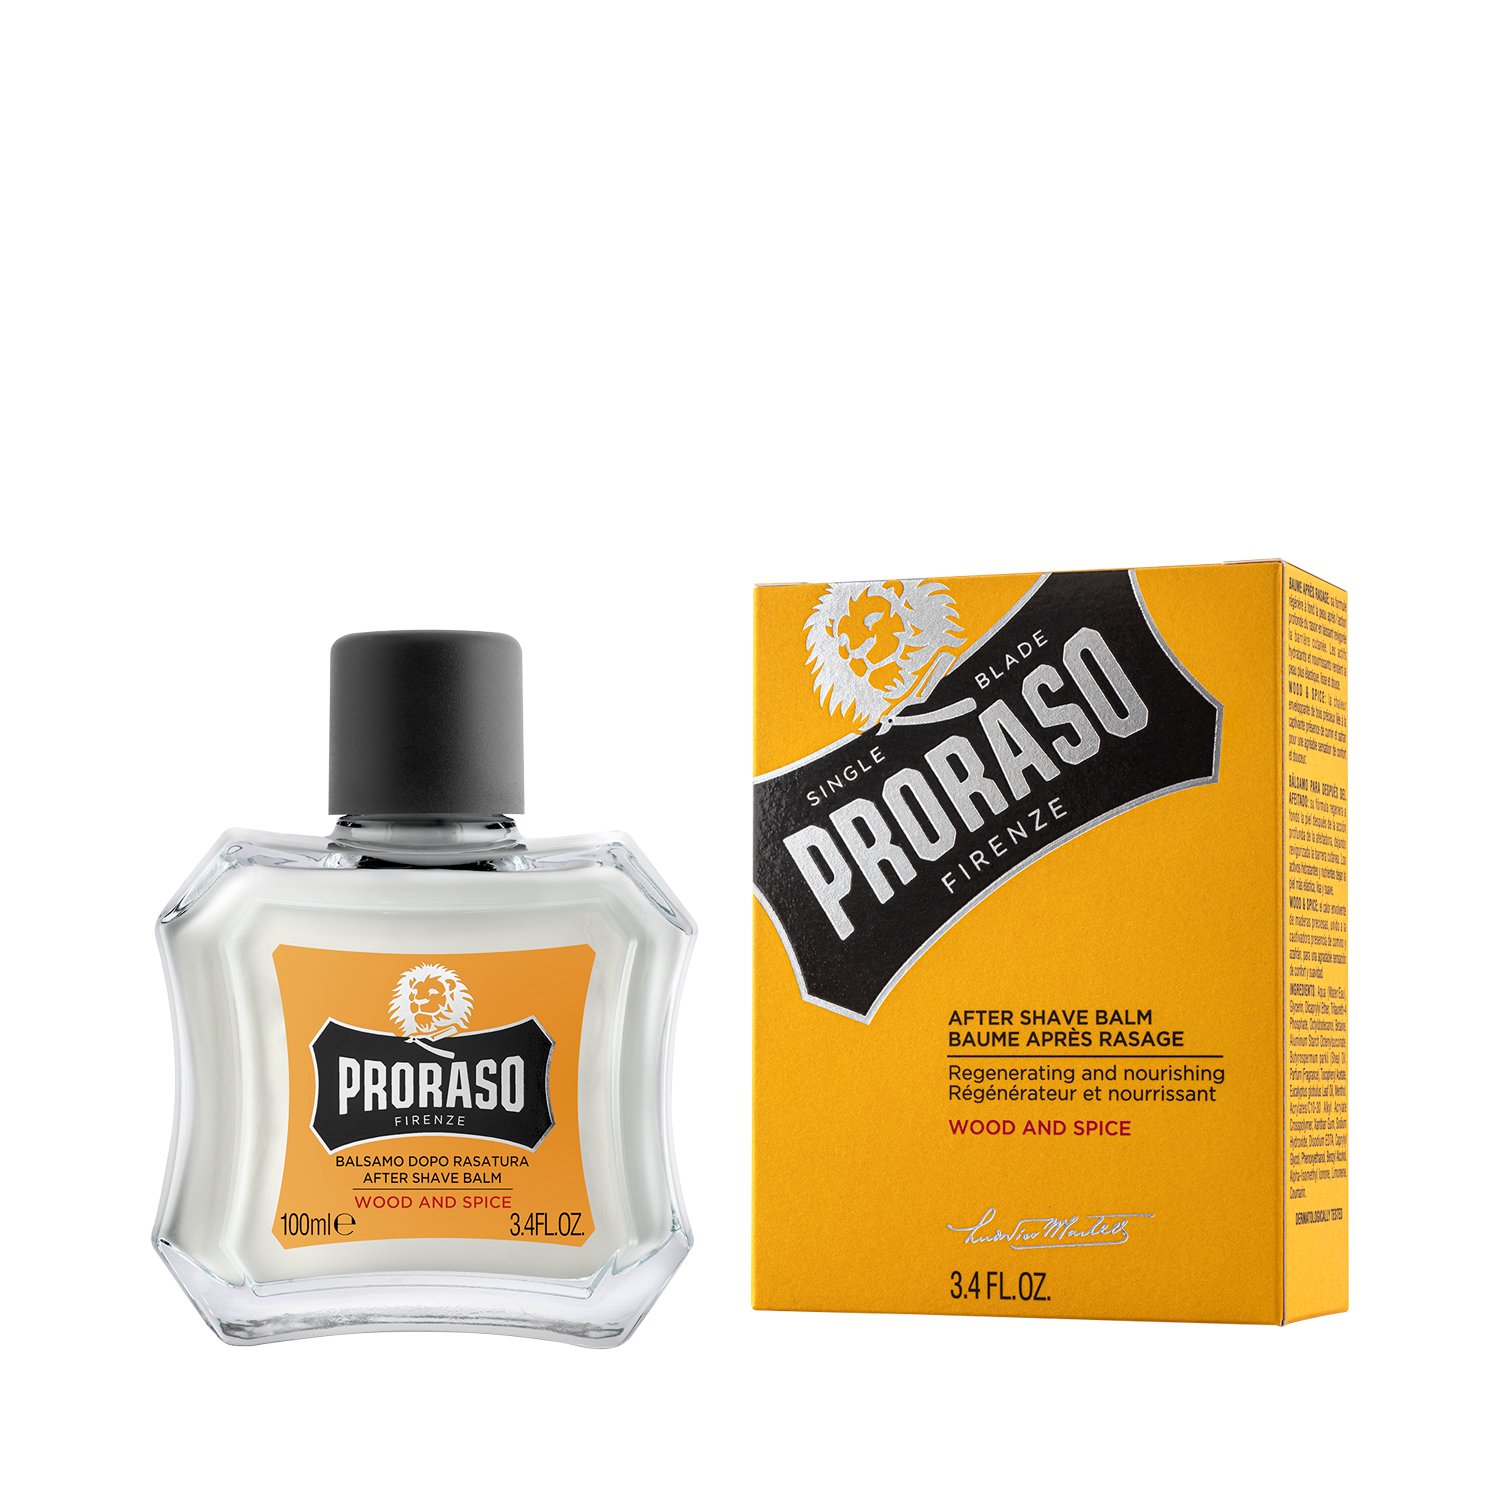 Proraso - After Shave Balm - Wood & Spice - SINGLE BLADE